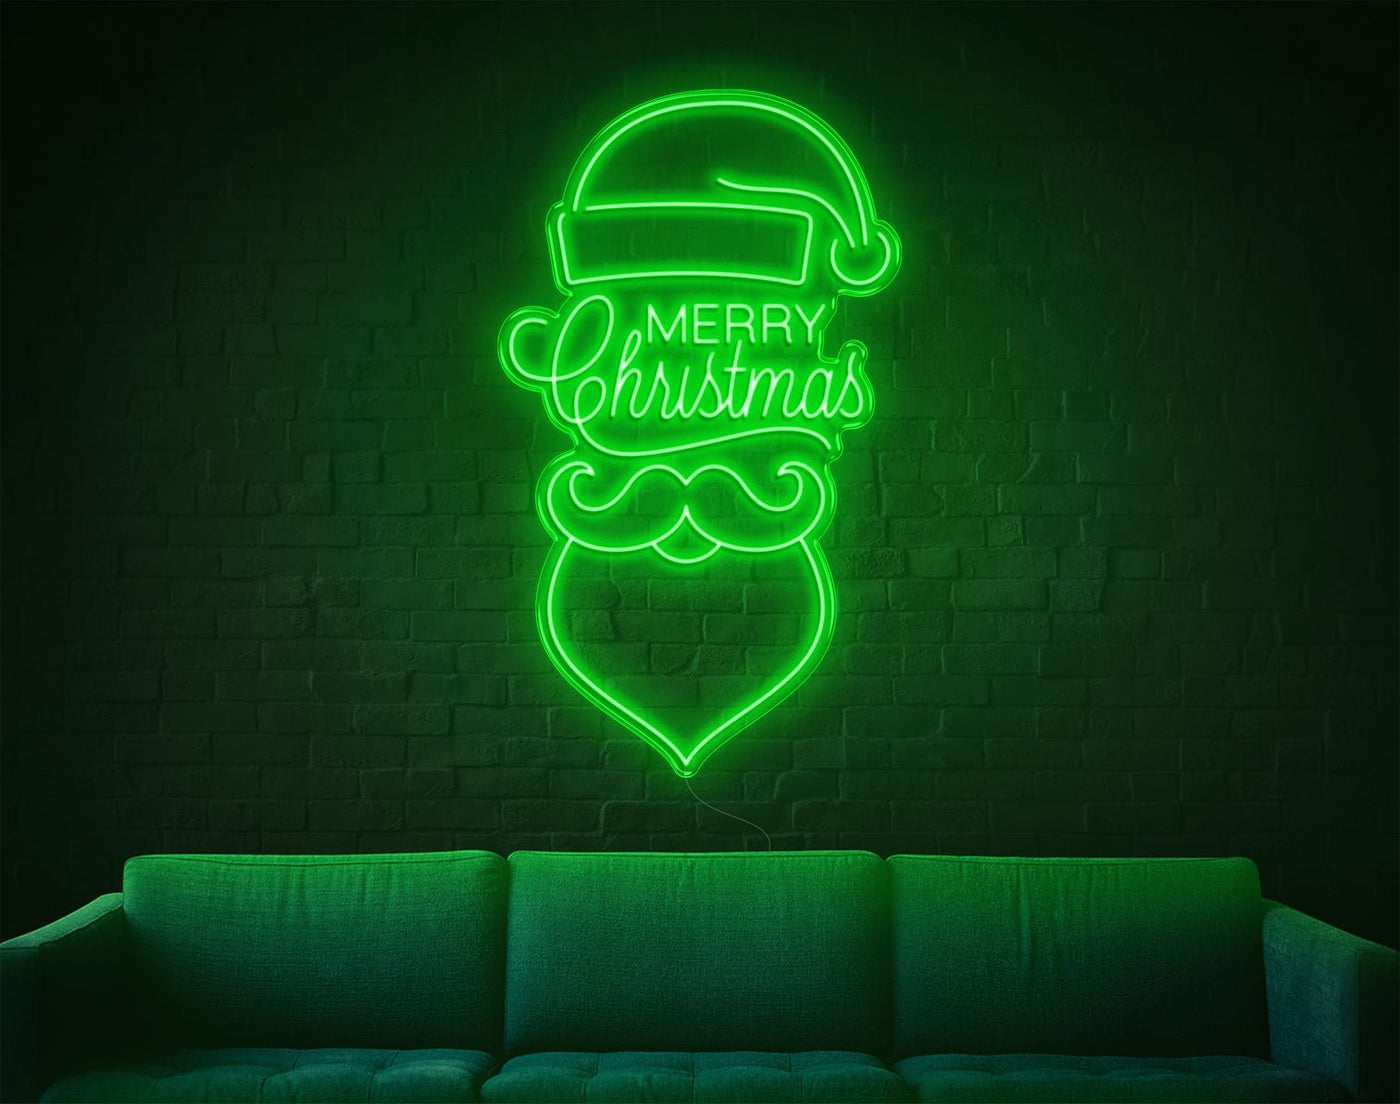 Merry Christmas V3 LED Neon Sign - 50inch x 30inchGreen